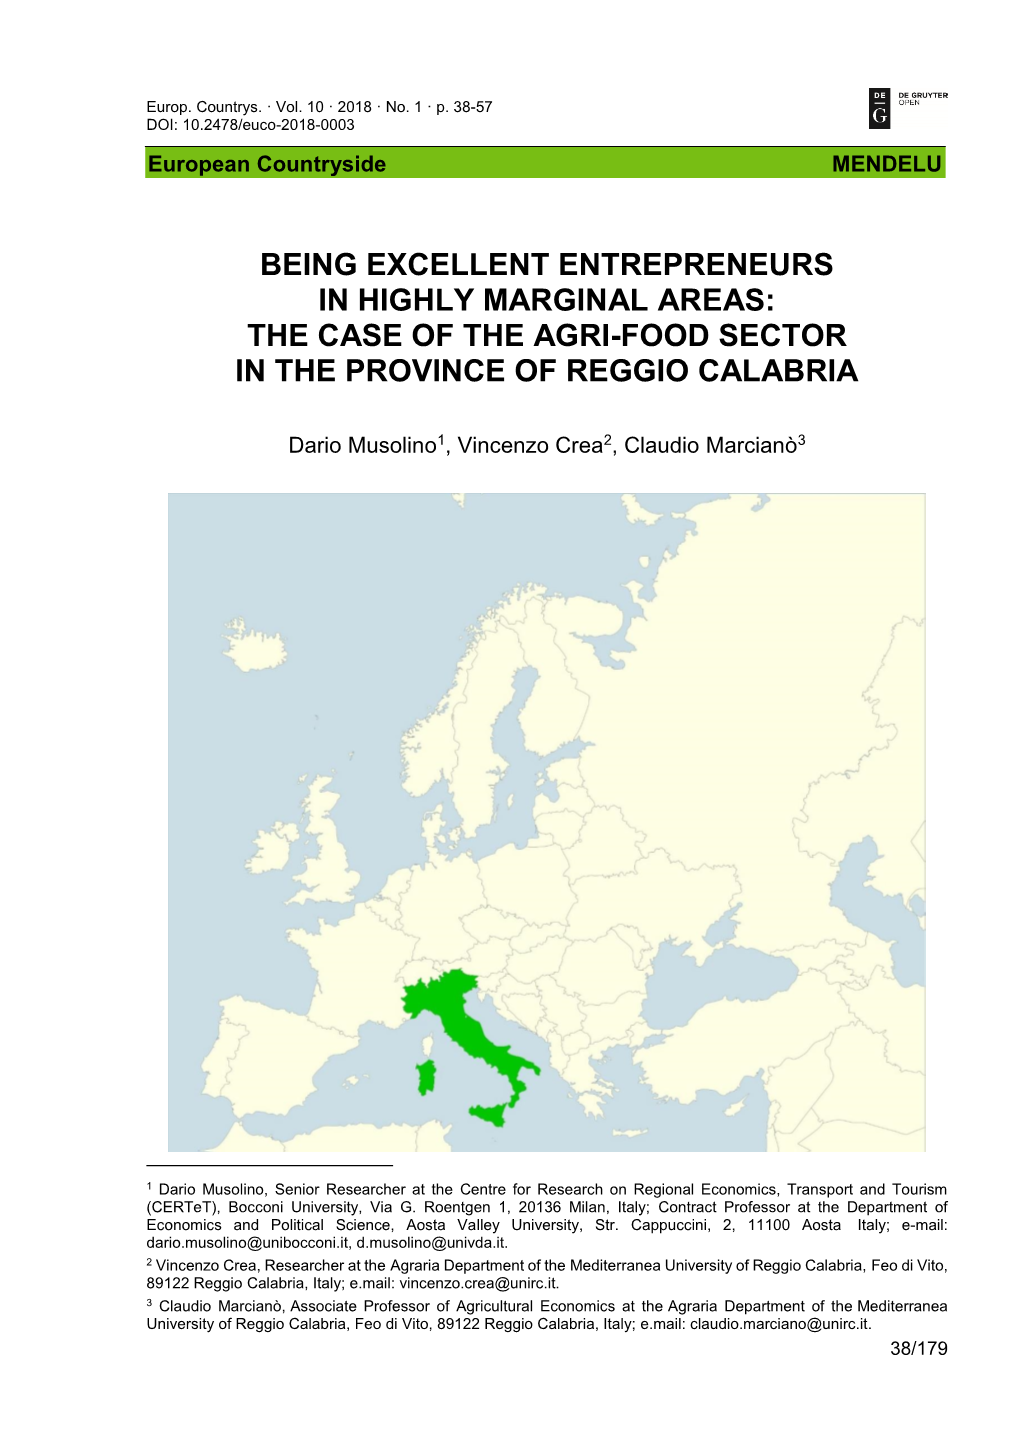 Being Excellent Entrepreneurs in Highly Marginal Areas: the Case of the Agri-Food Sector in the Province of Reggio Calabria